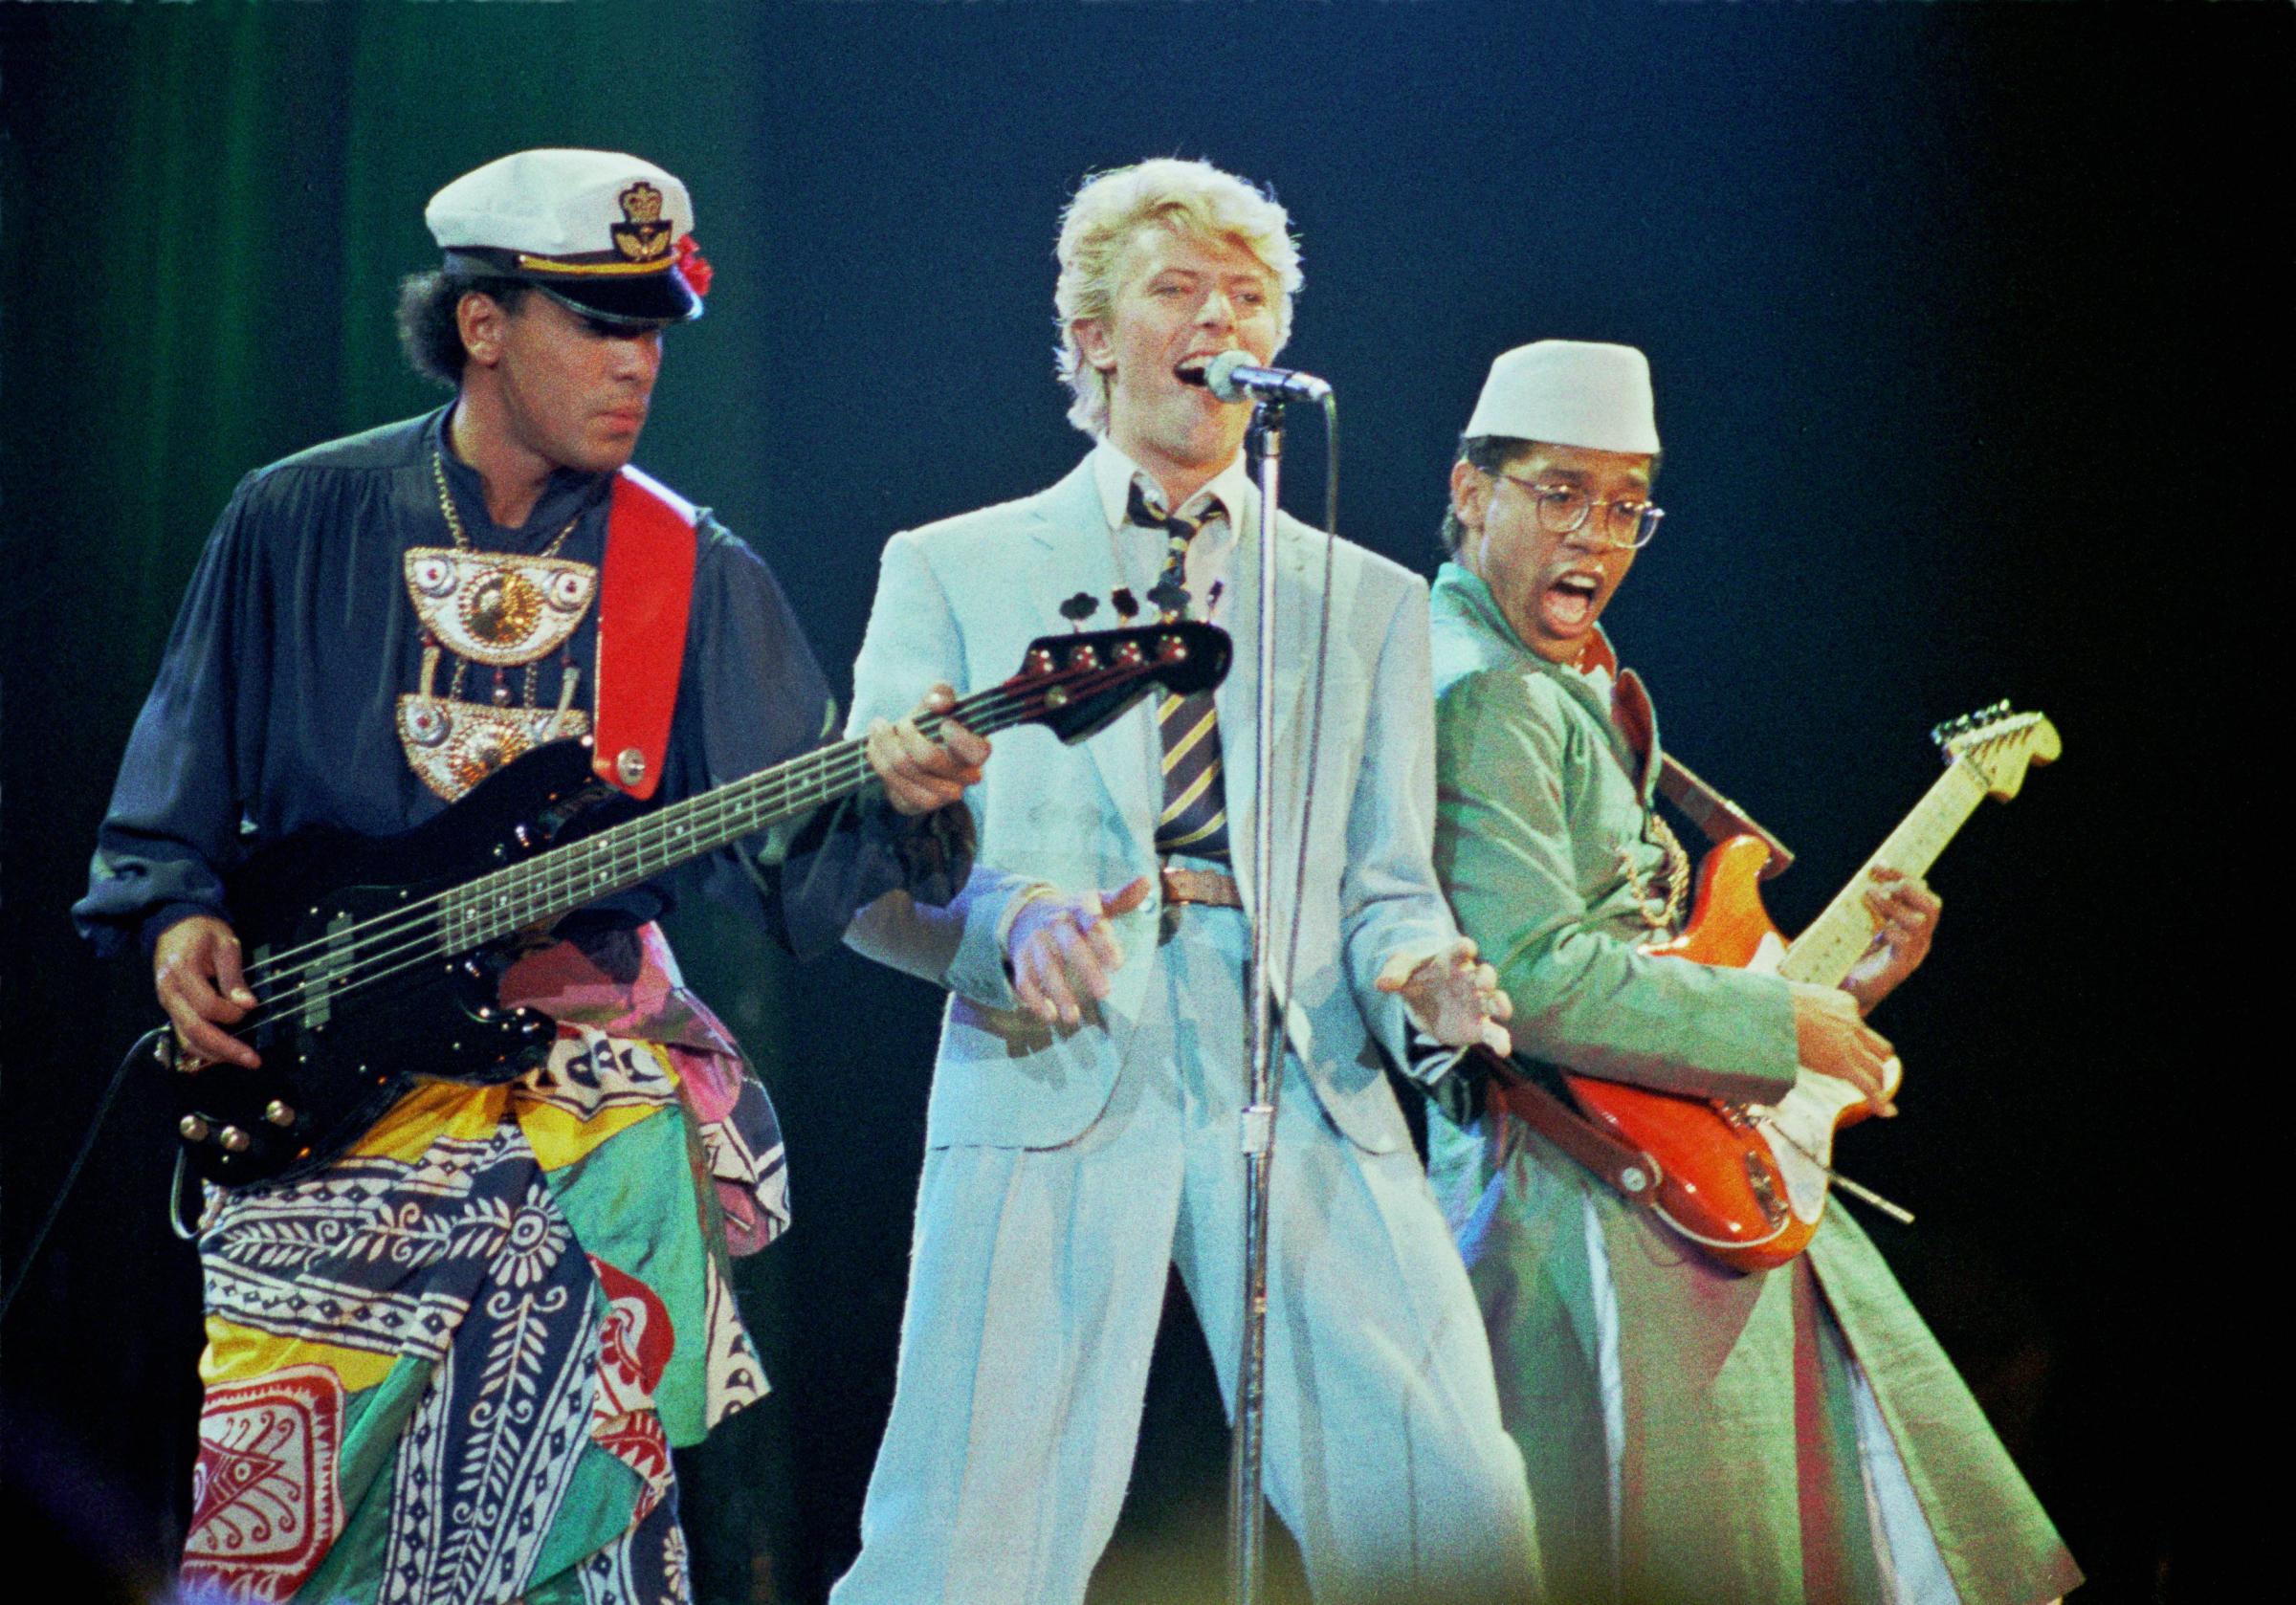 From left: Carmine Rojas, David Bowie, and Carlos Alomar perform during the Serious Moonlight tour in 1983 at Wembley Arena in London.